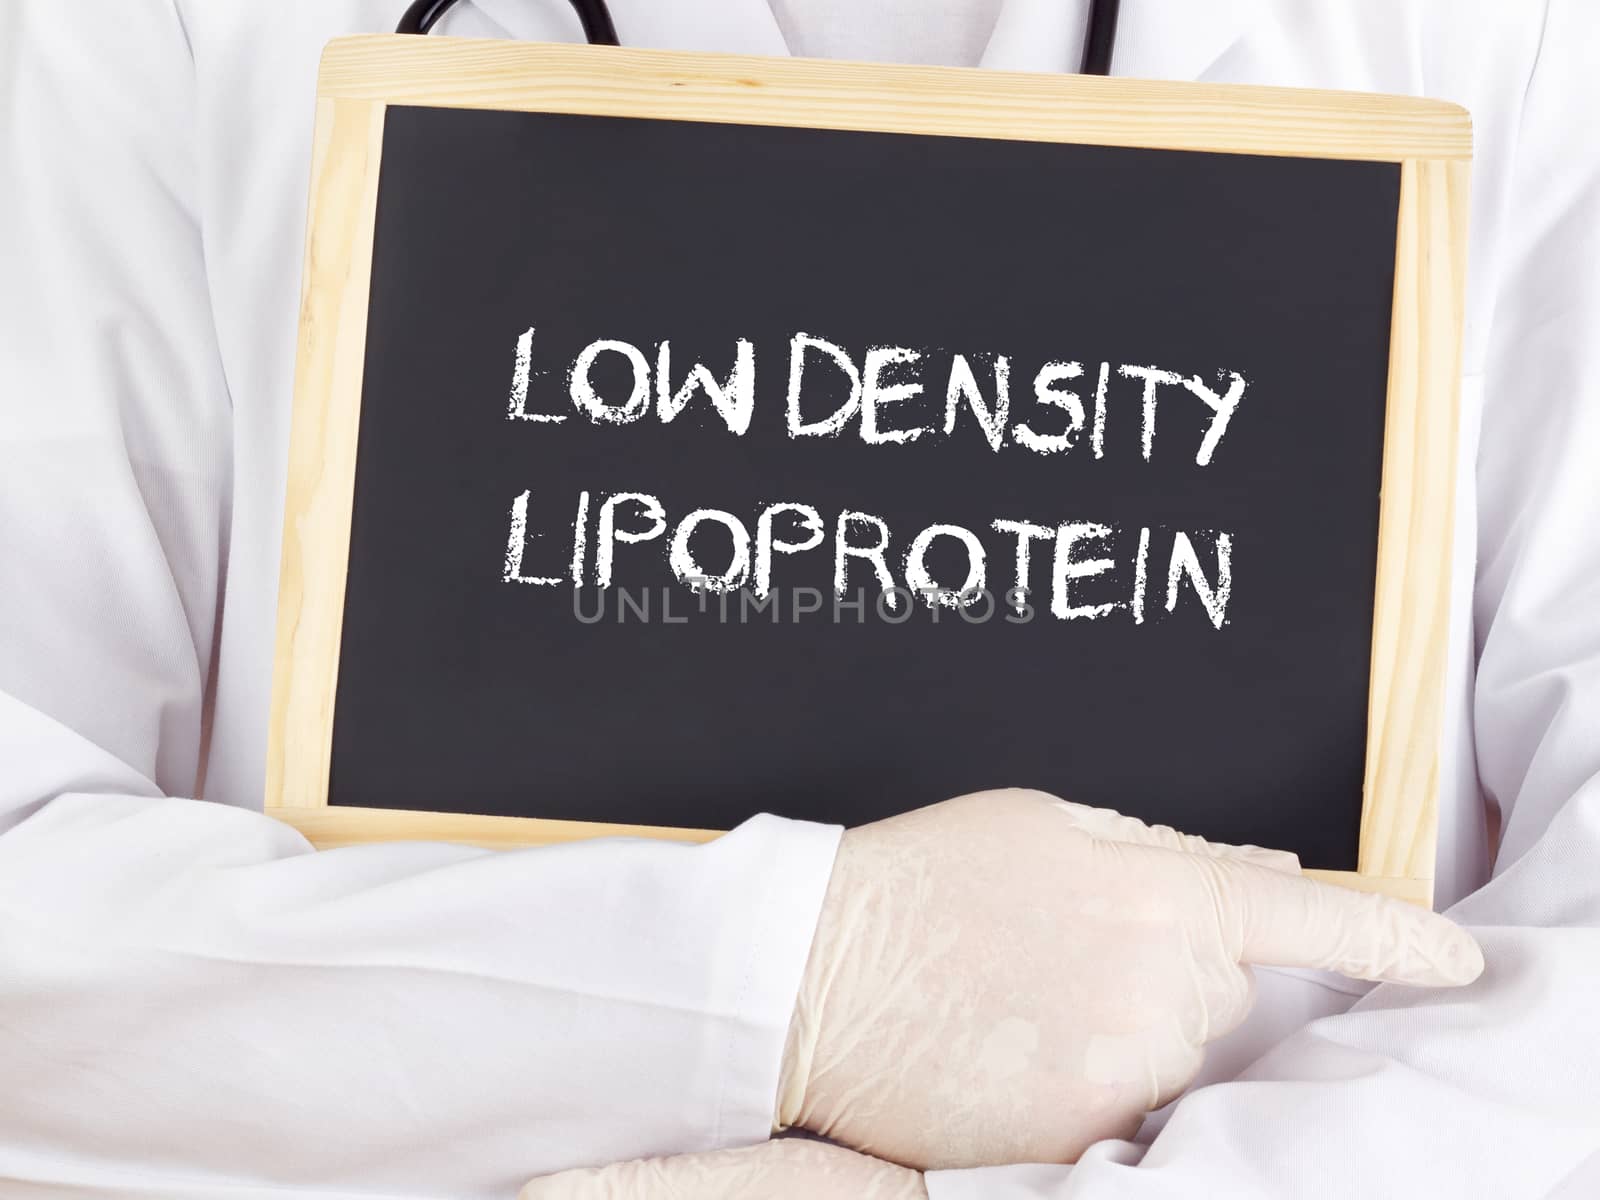 Doctor shows information: low density lipoprotein in german by gwolters